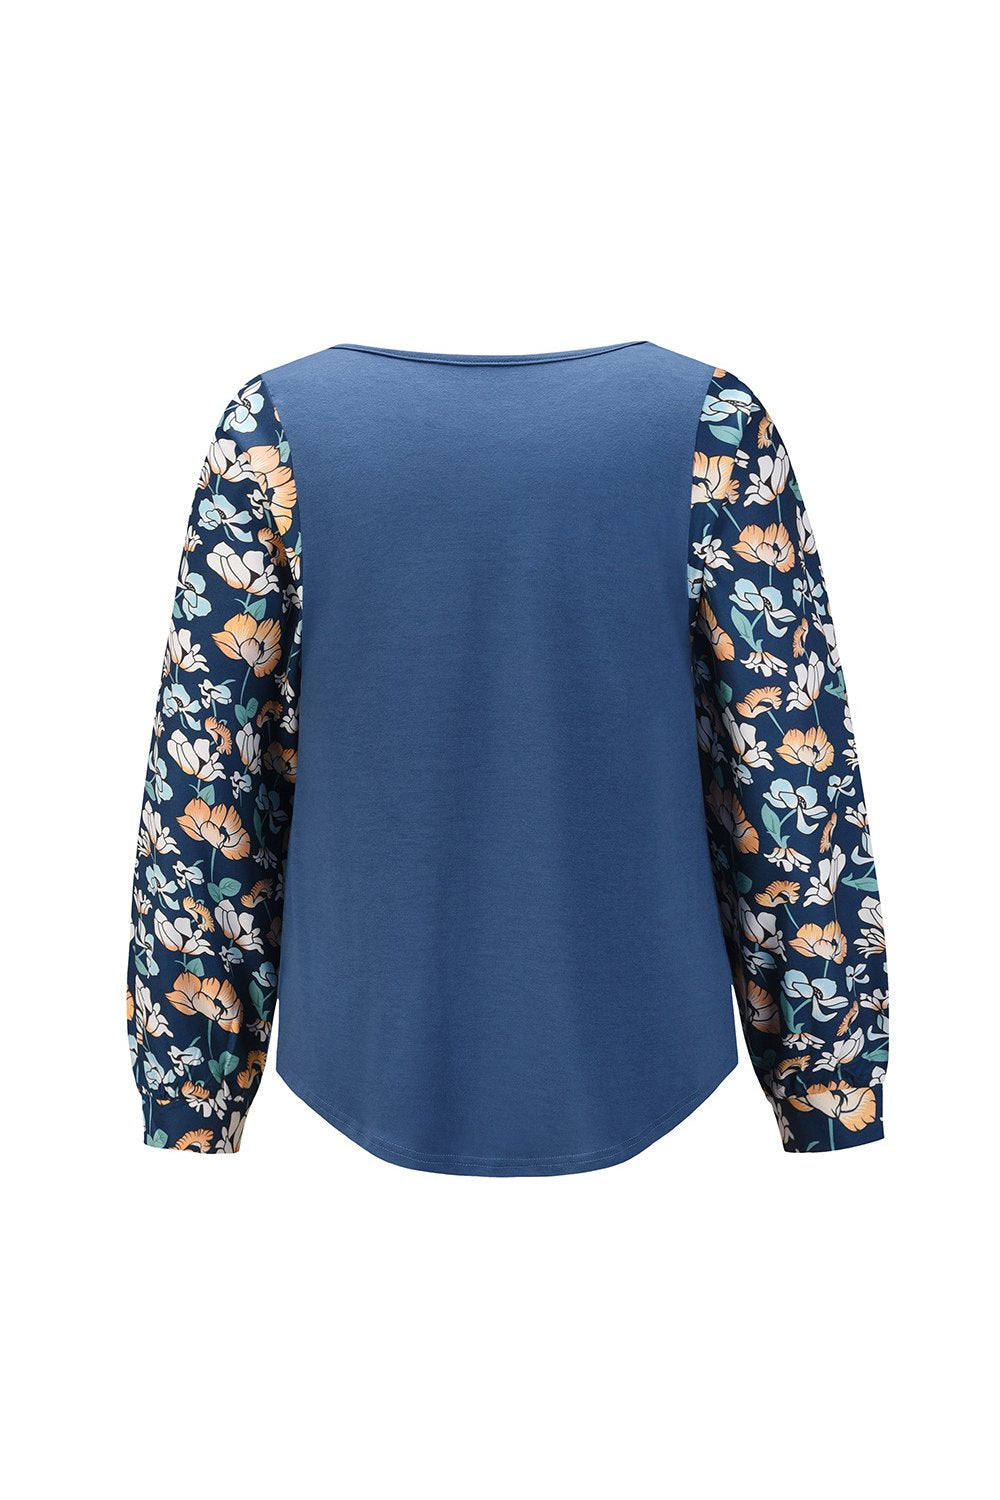 floral sleeve round neck top